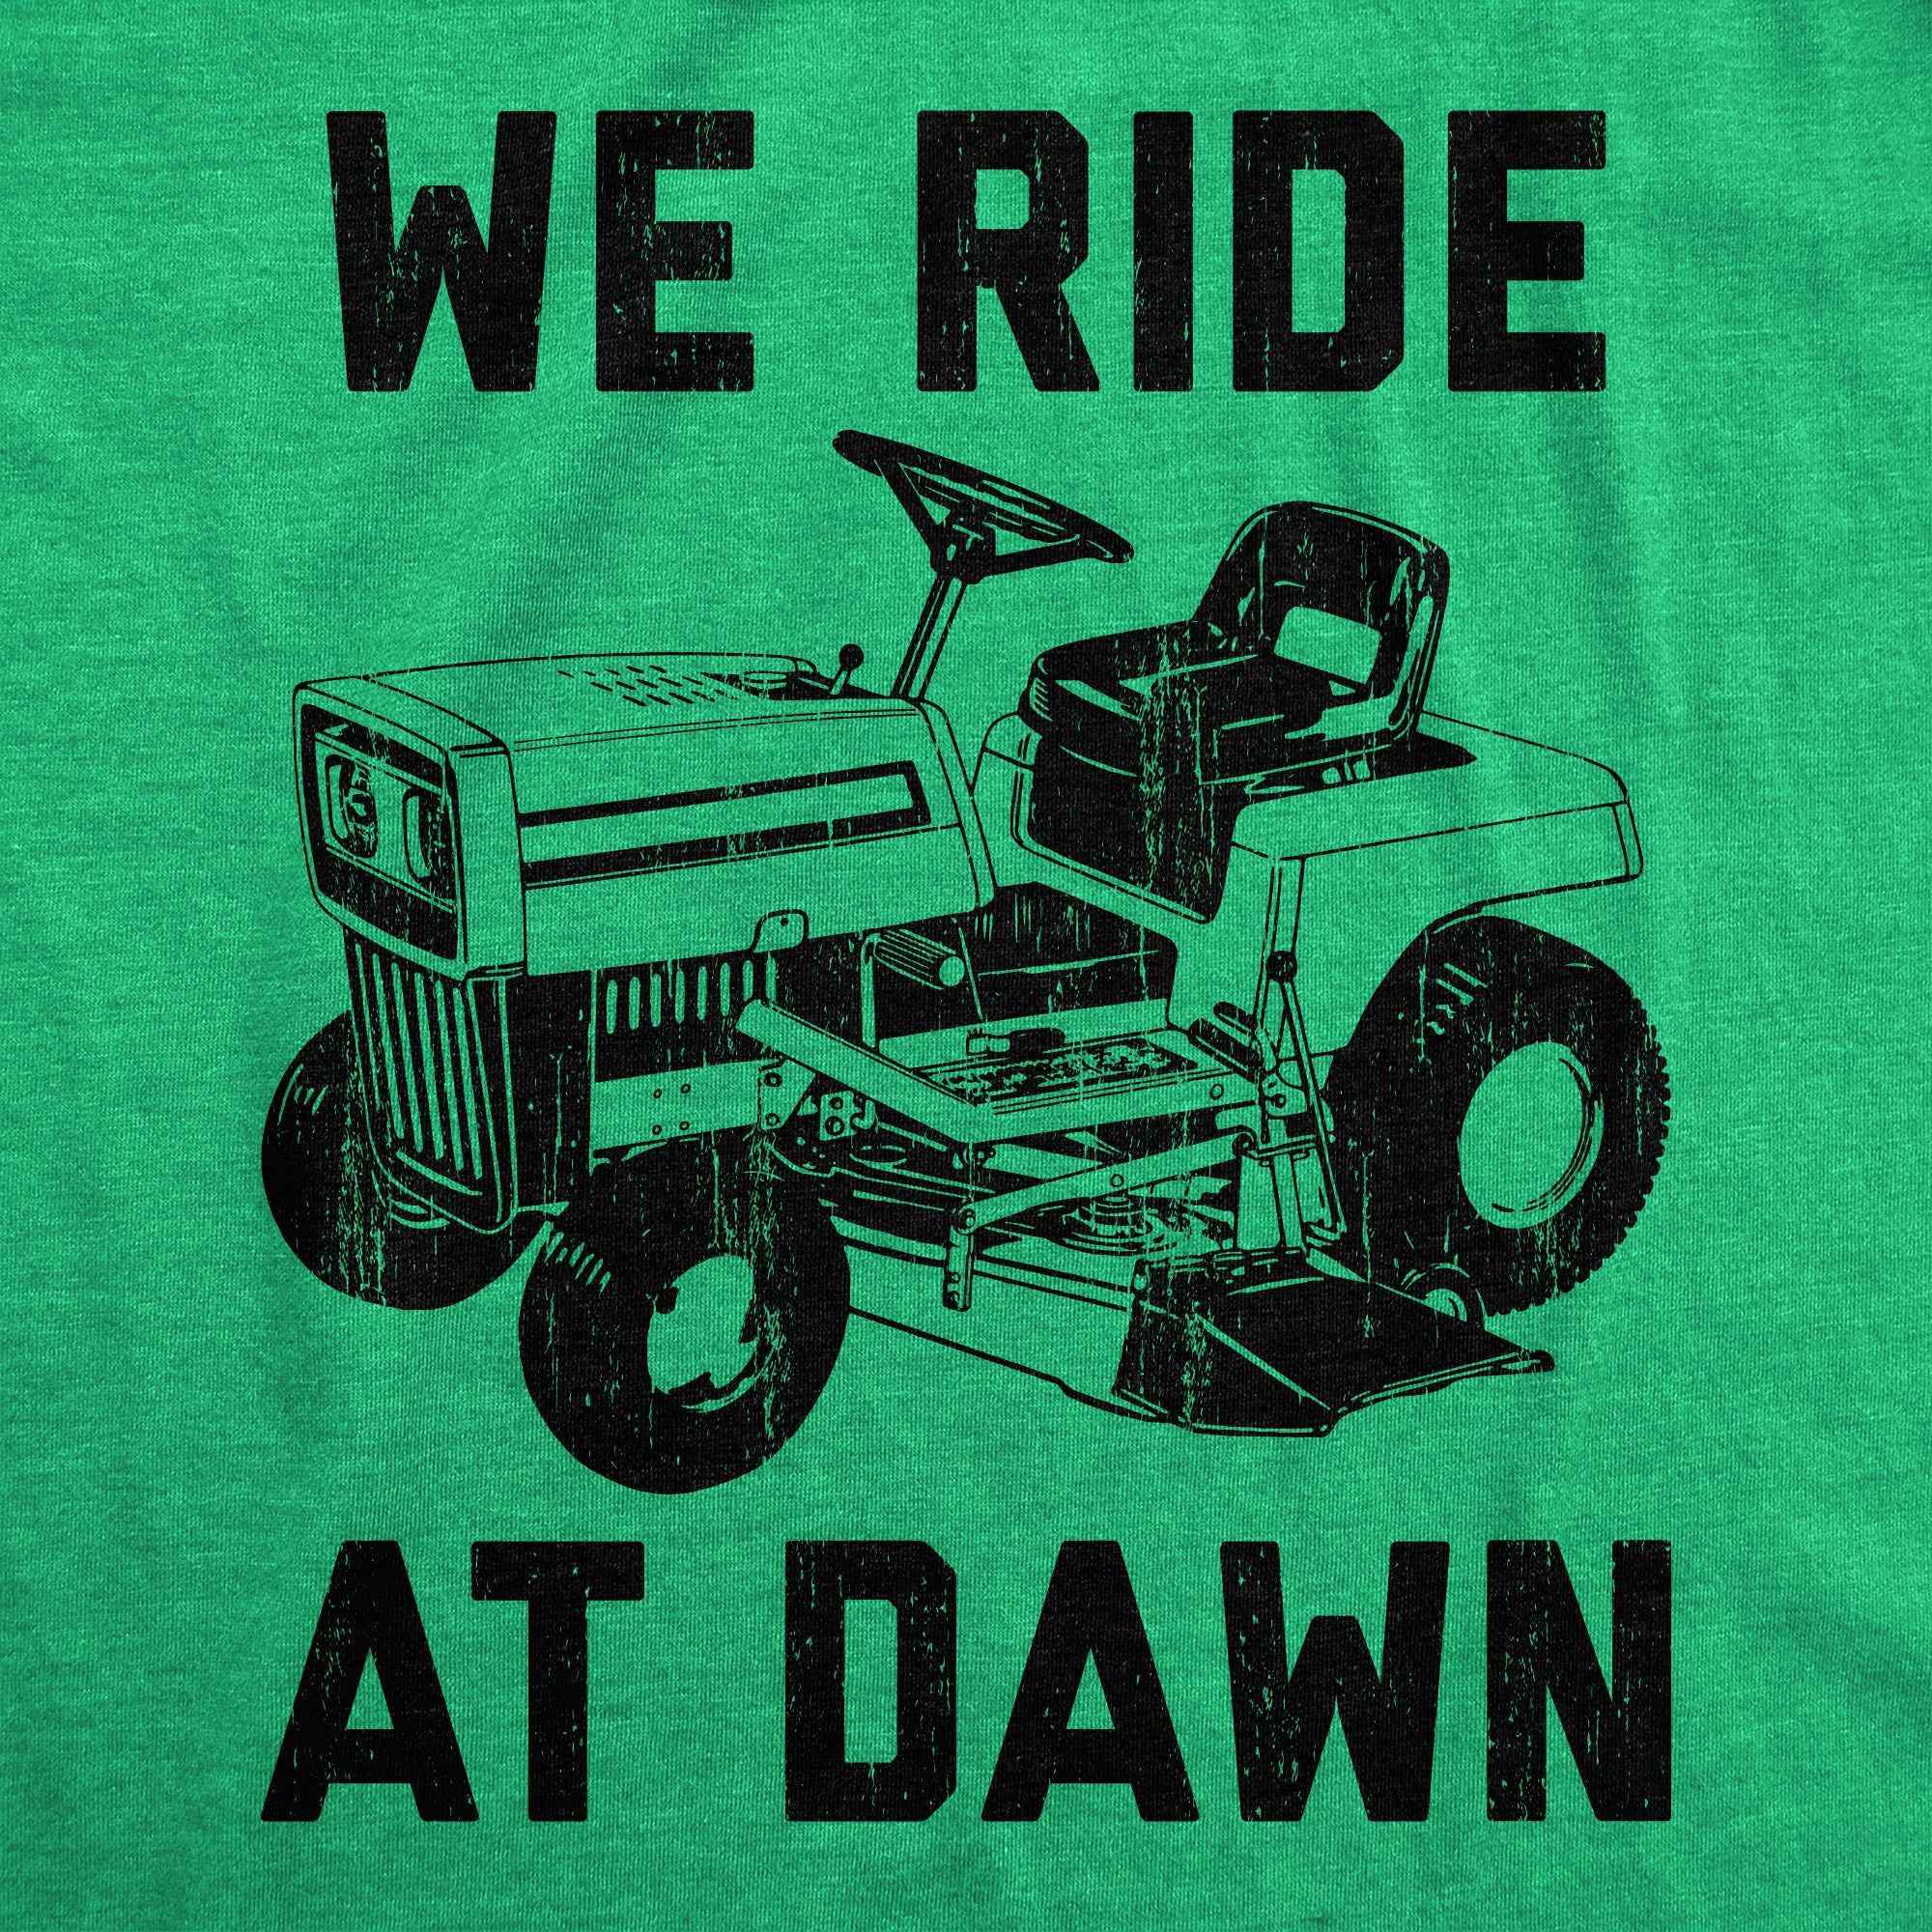 Funny Heather Green - Ride at Dawn We Ride At Dawn Mens T Shirt Nerdy Father's Day Sarcastic Tee